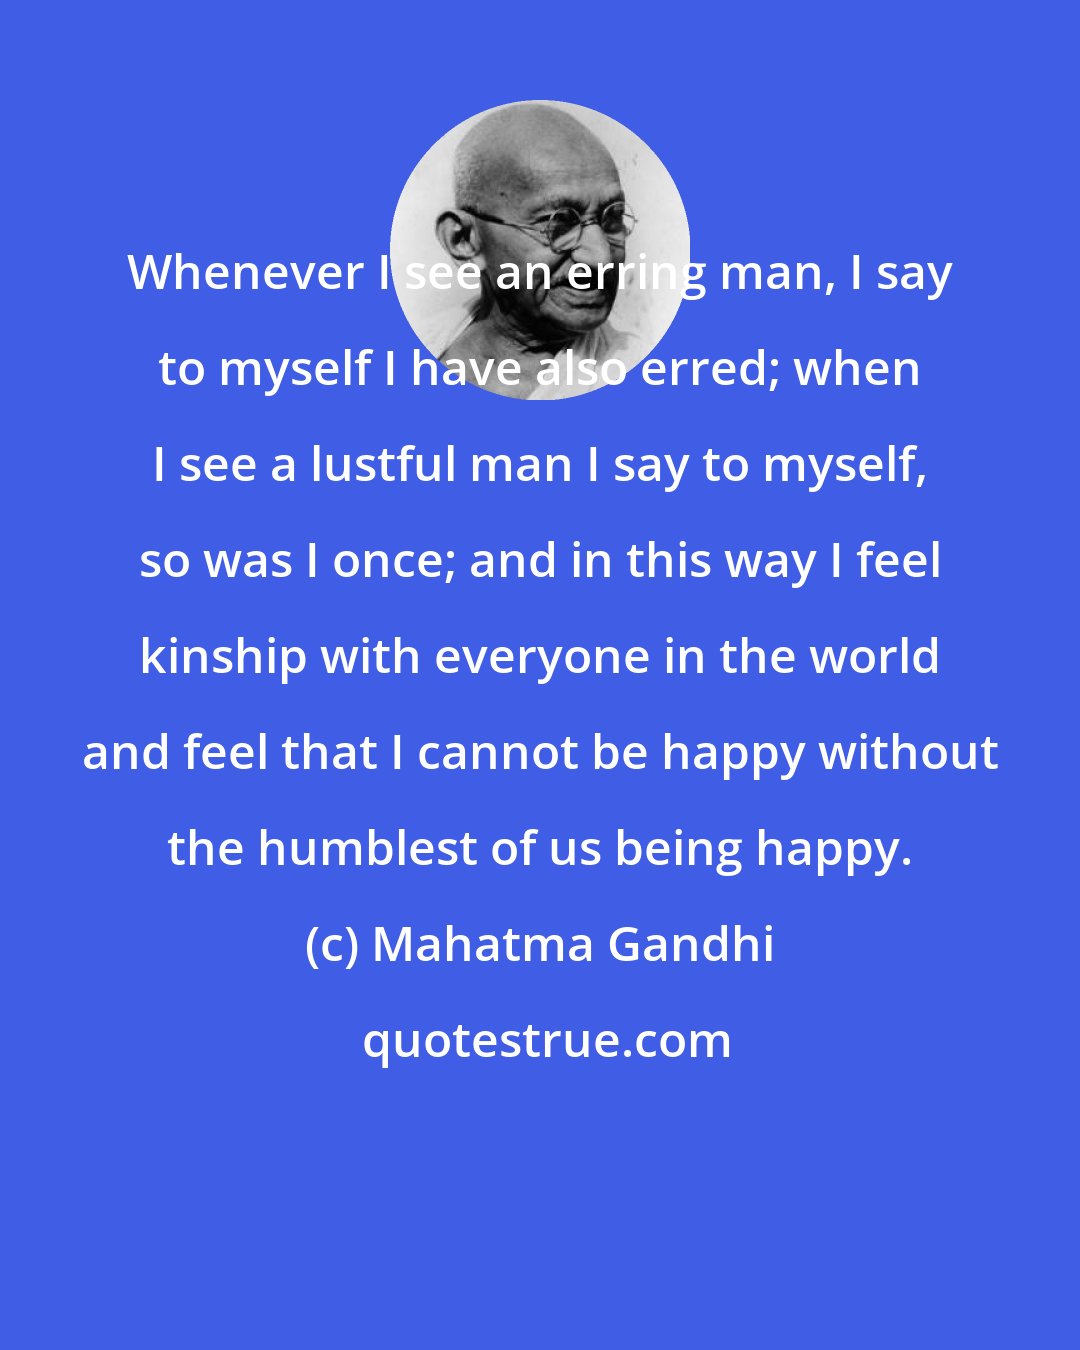 Mahatma Gandhi: Whenever I see an erring man, I say to myself I have also erred; when I see a lustful man I say to myself, so was I once; and in this way I feel kinship with everyone in the world and feel that I cannot be happy without the humblest of us being happy.